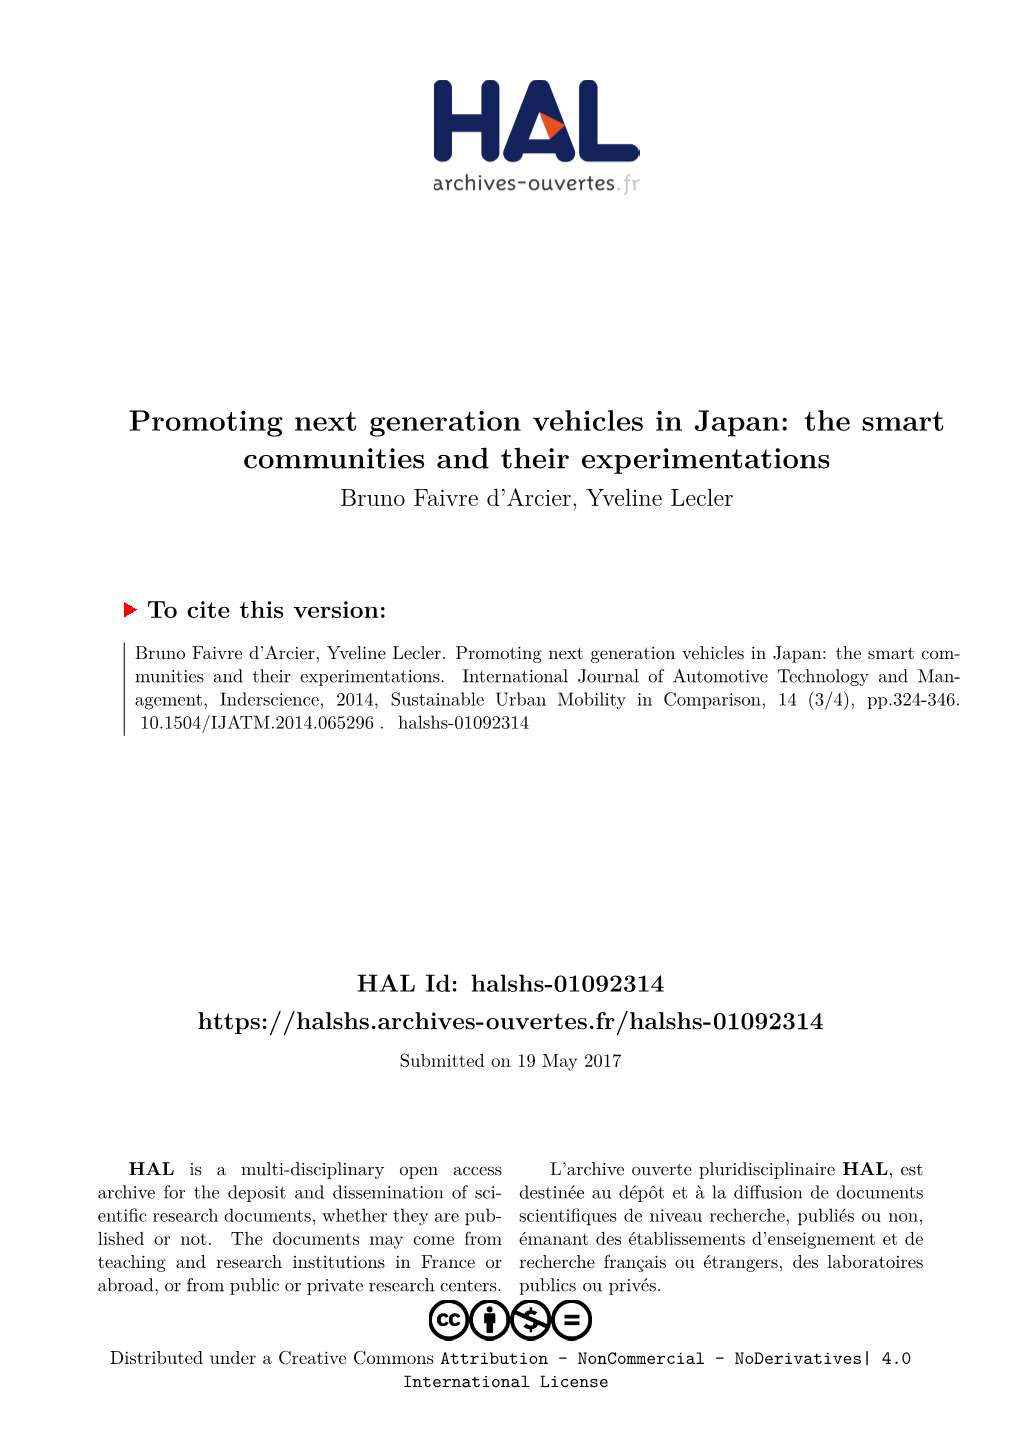 Promoting Next Generation Vehicles in Japan: the Smart Communities and Their Experimentations Bruno Faivre D’Arcier, Yveline Lecler